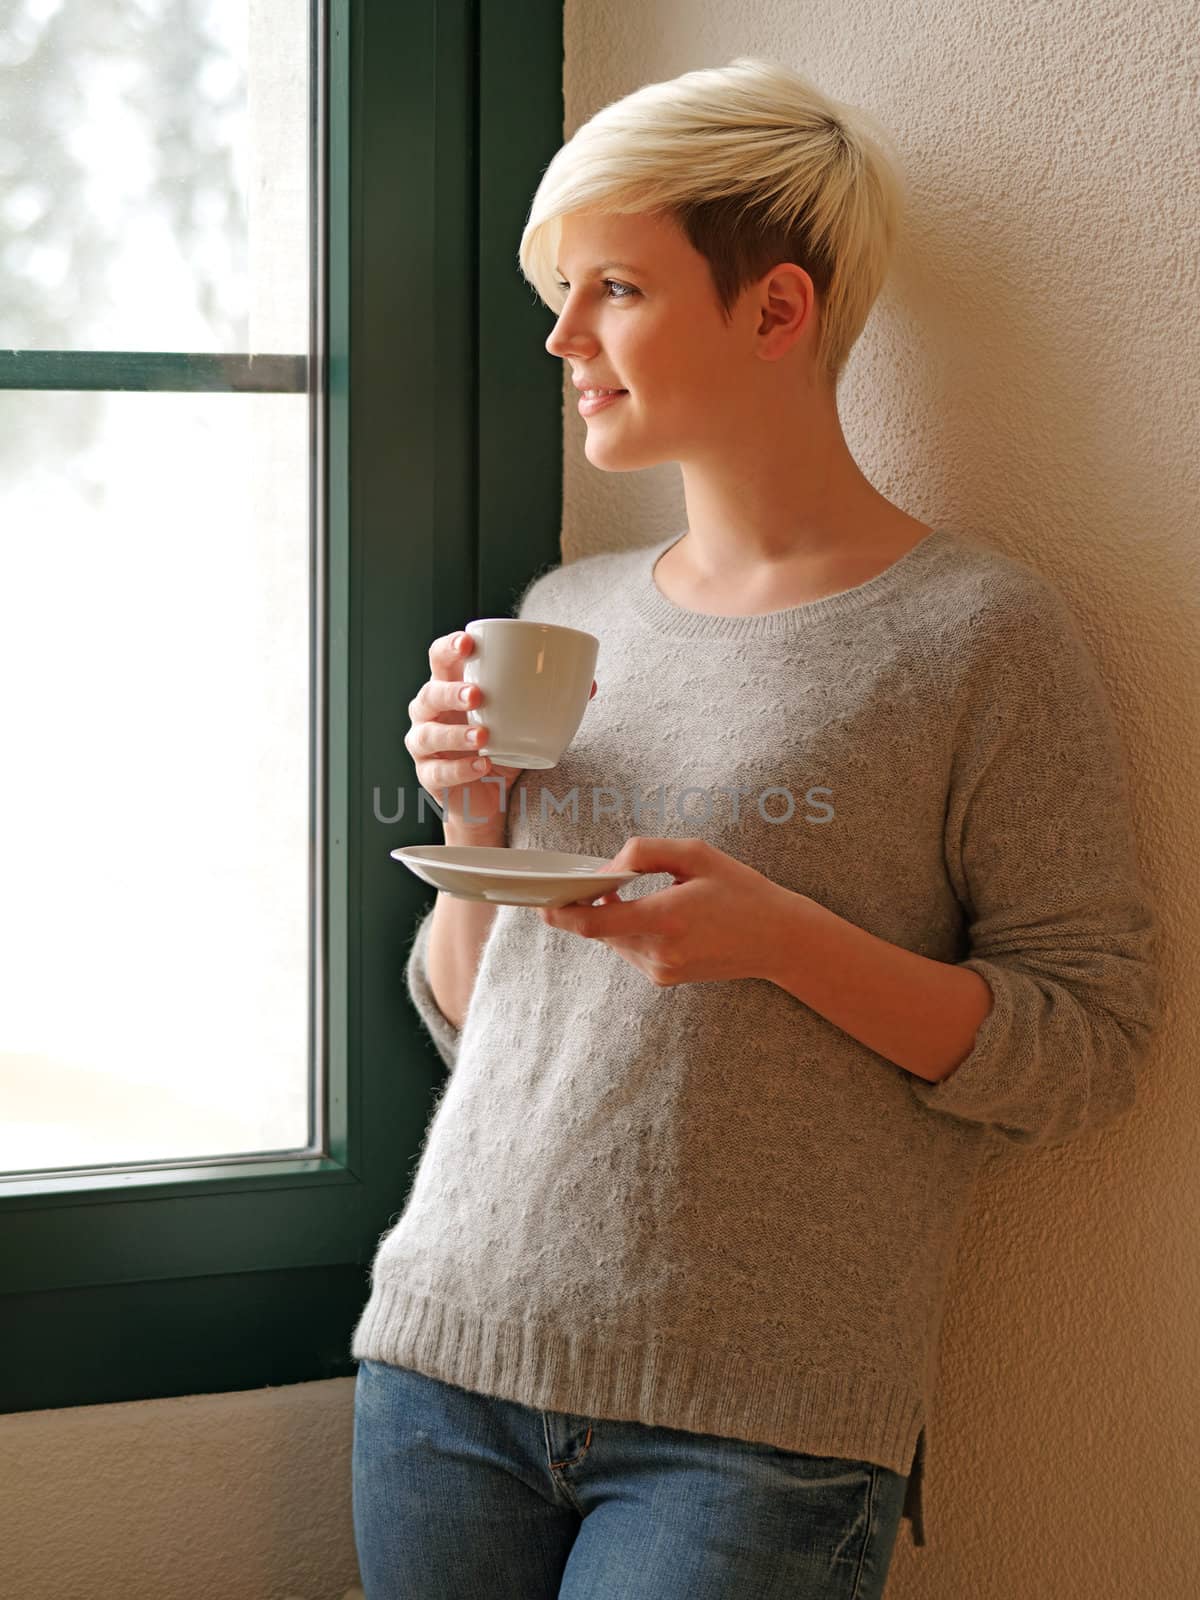 Photo of a beautiful young female drinking from a cup and looking out the window during winter.